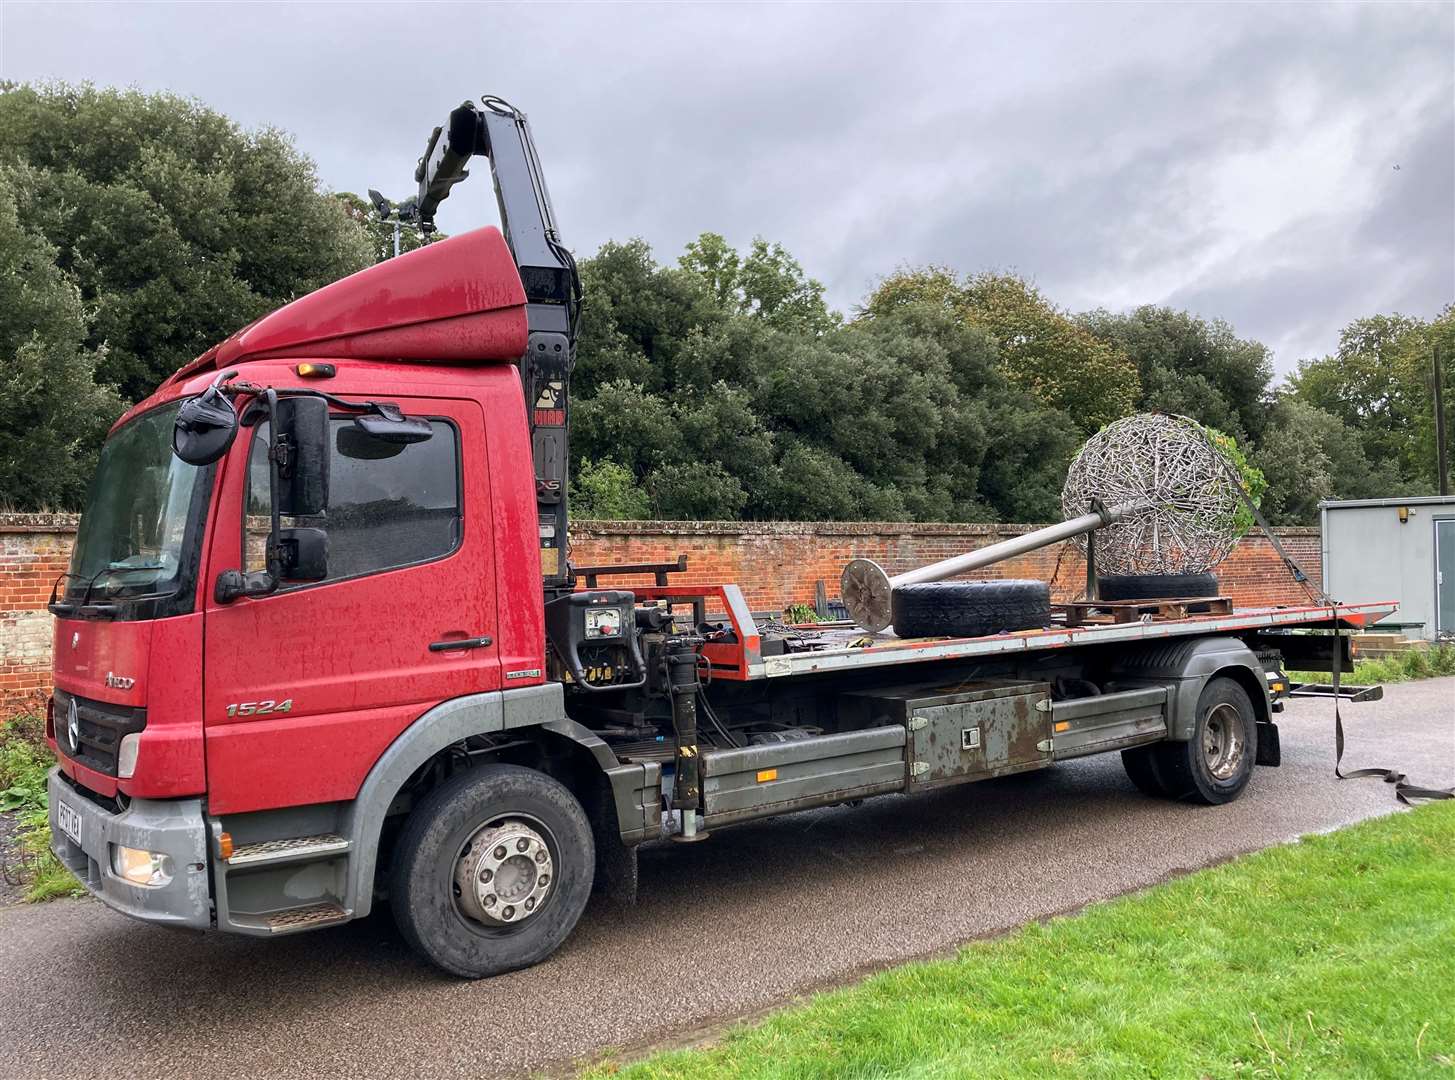 The metal trees were removed from Nowton Park in 2020. Picture: Camille Berriman